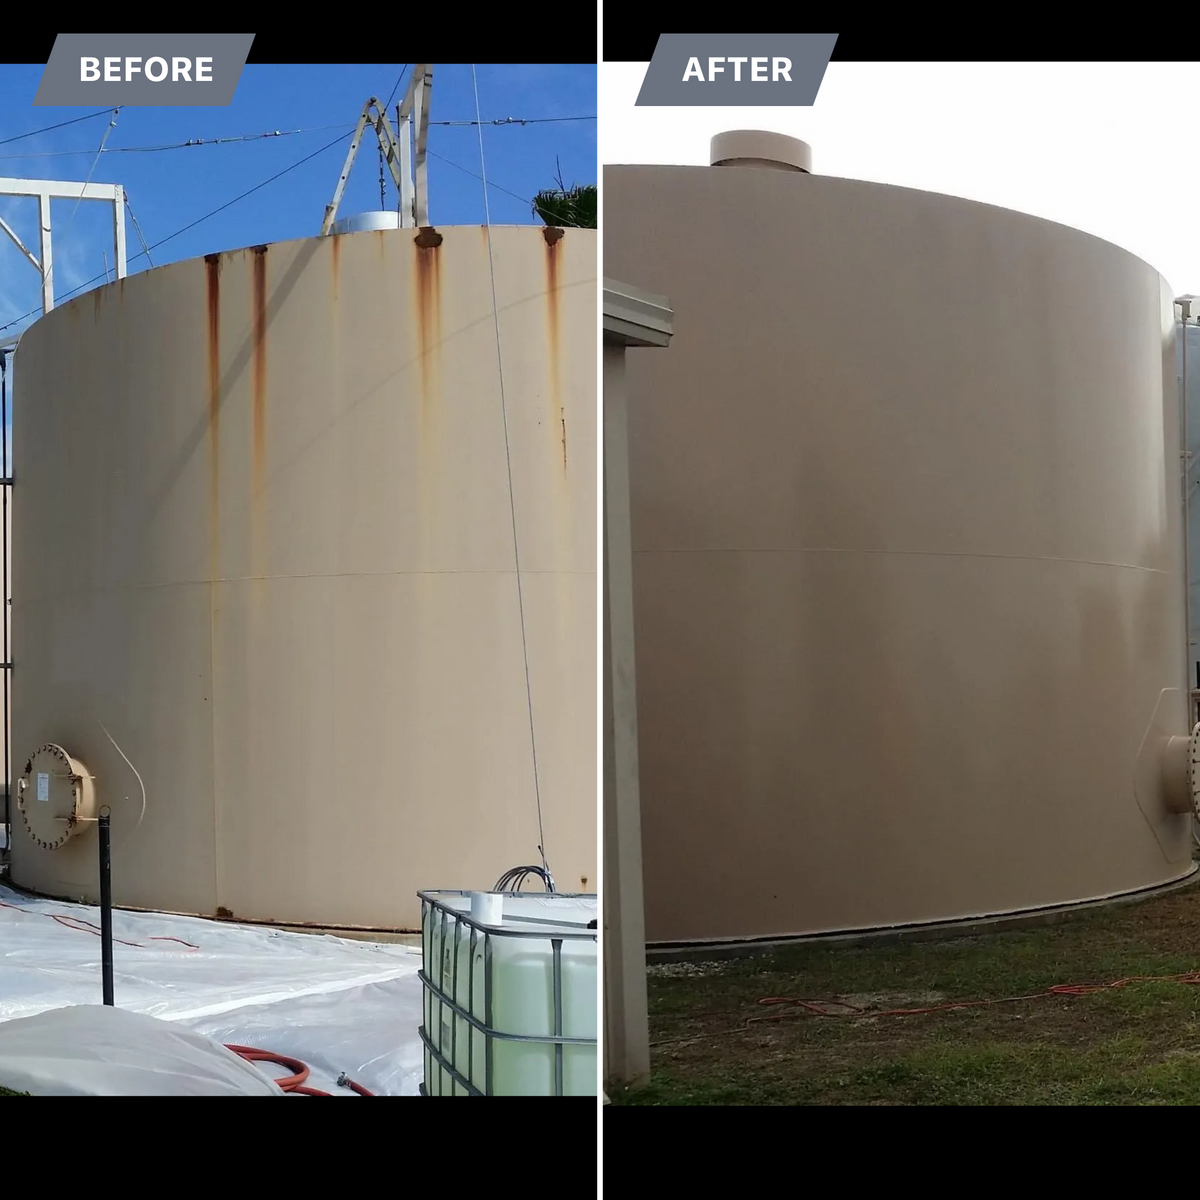 Containment Systems for Hotspray Industrial Coatings  in Orlando, FL